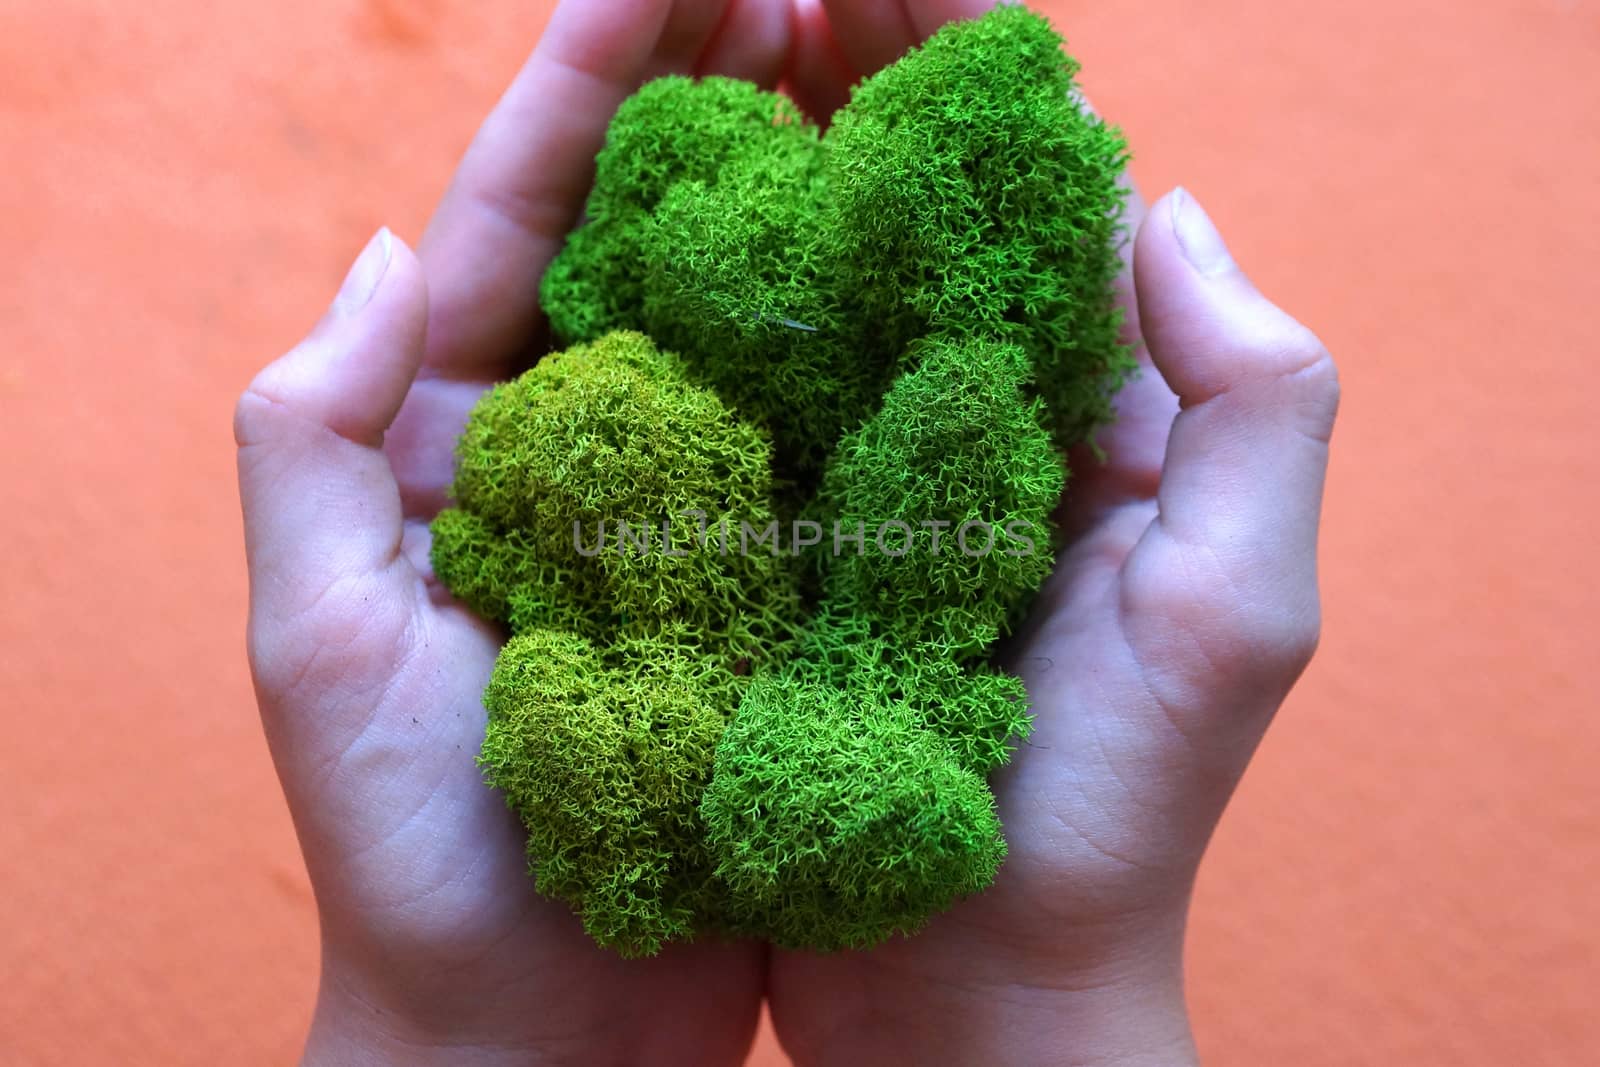 green stabilized moss in woman's hands as a symbol of purity by Annado